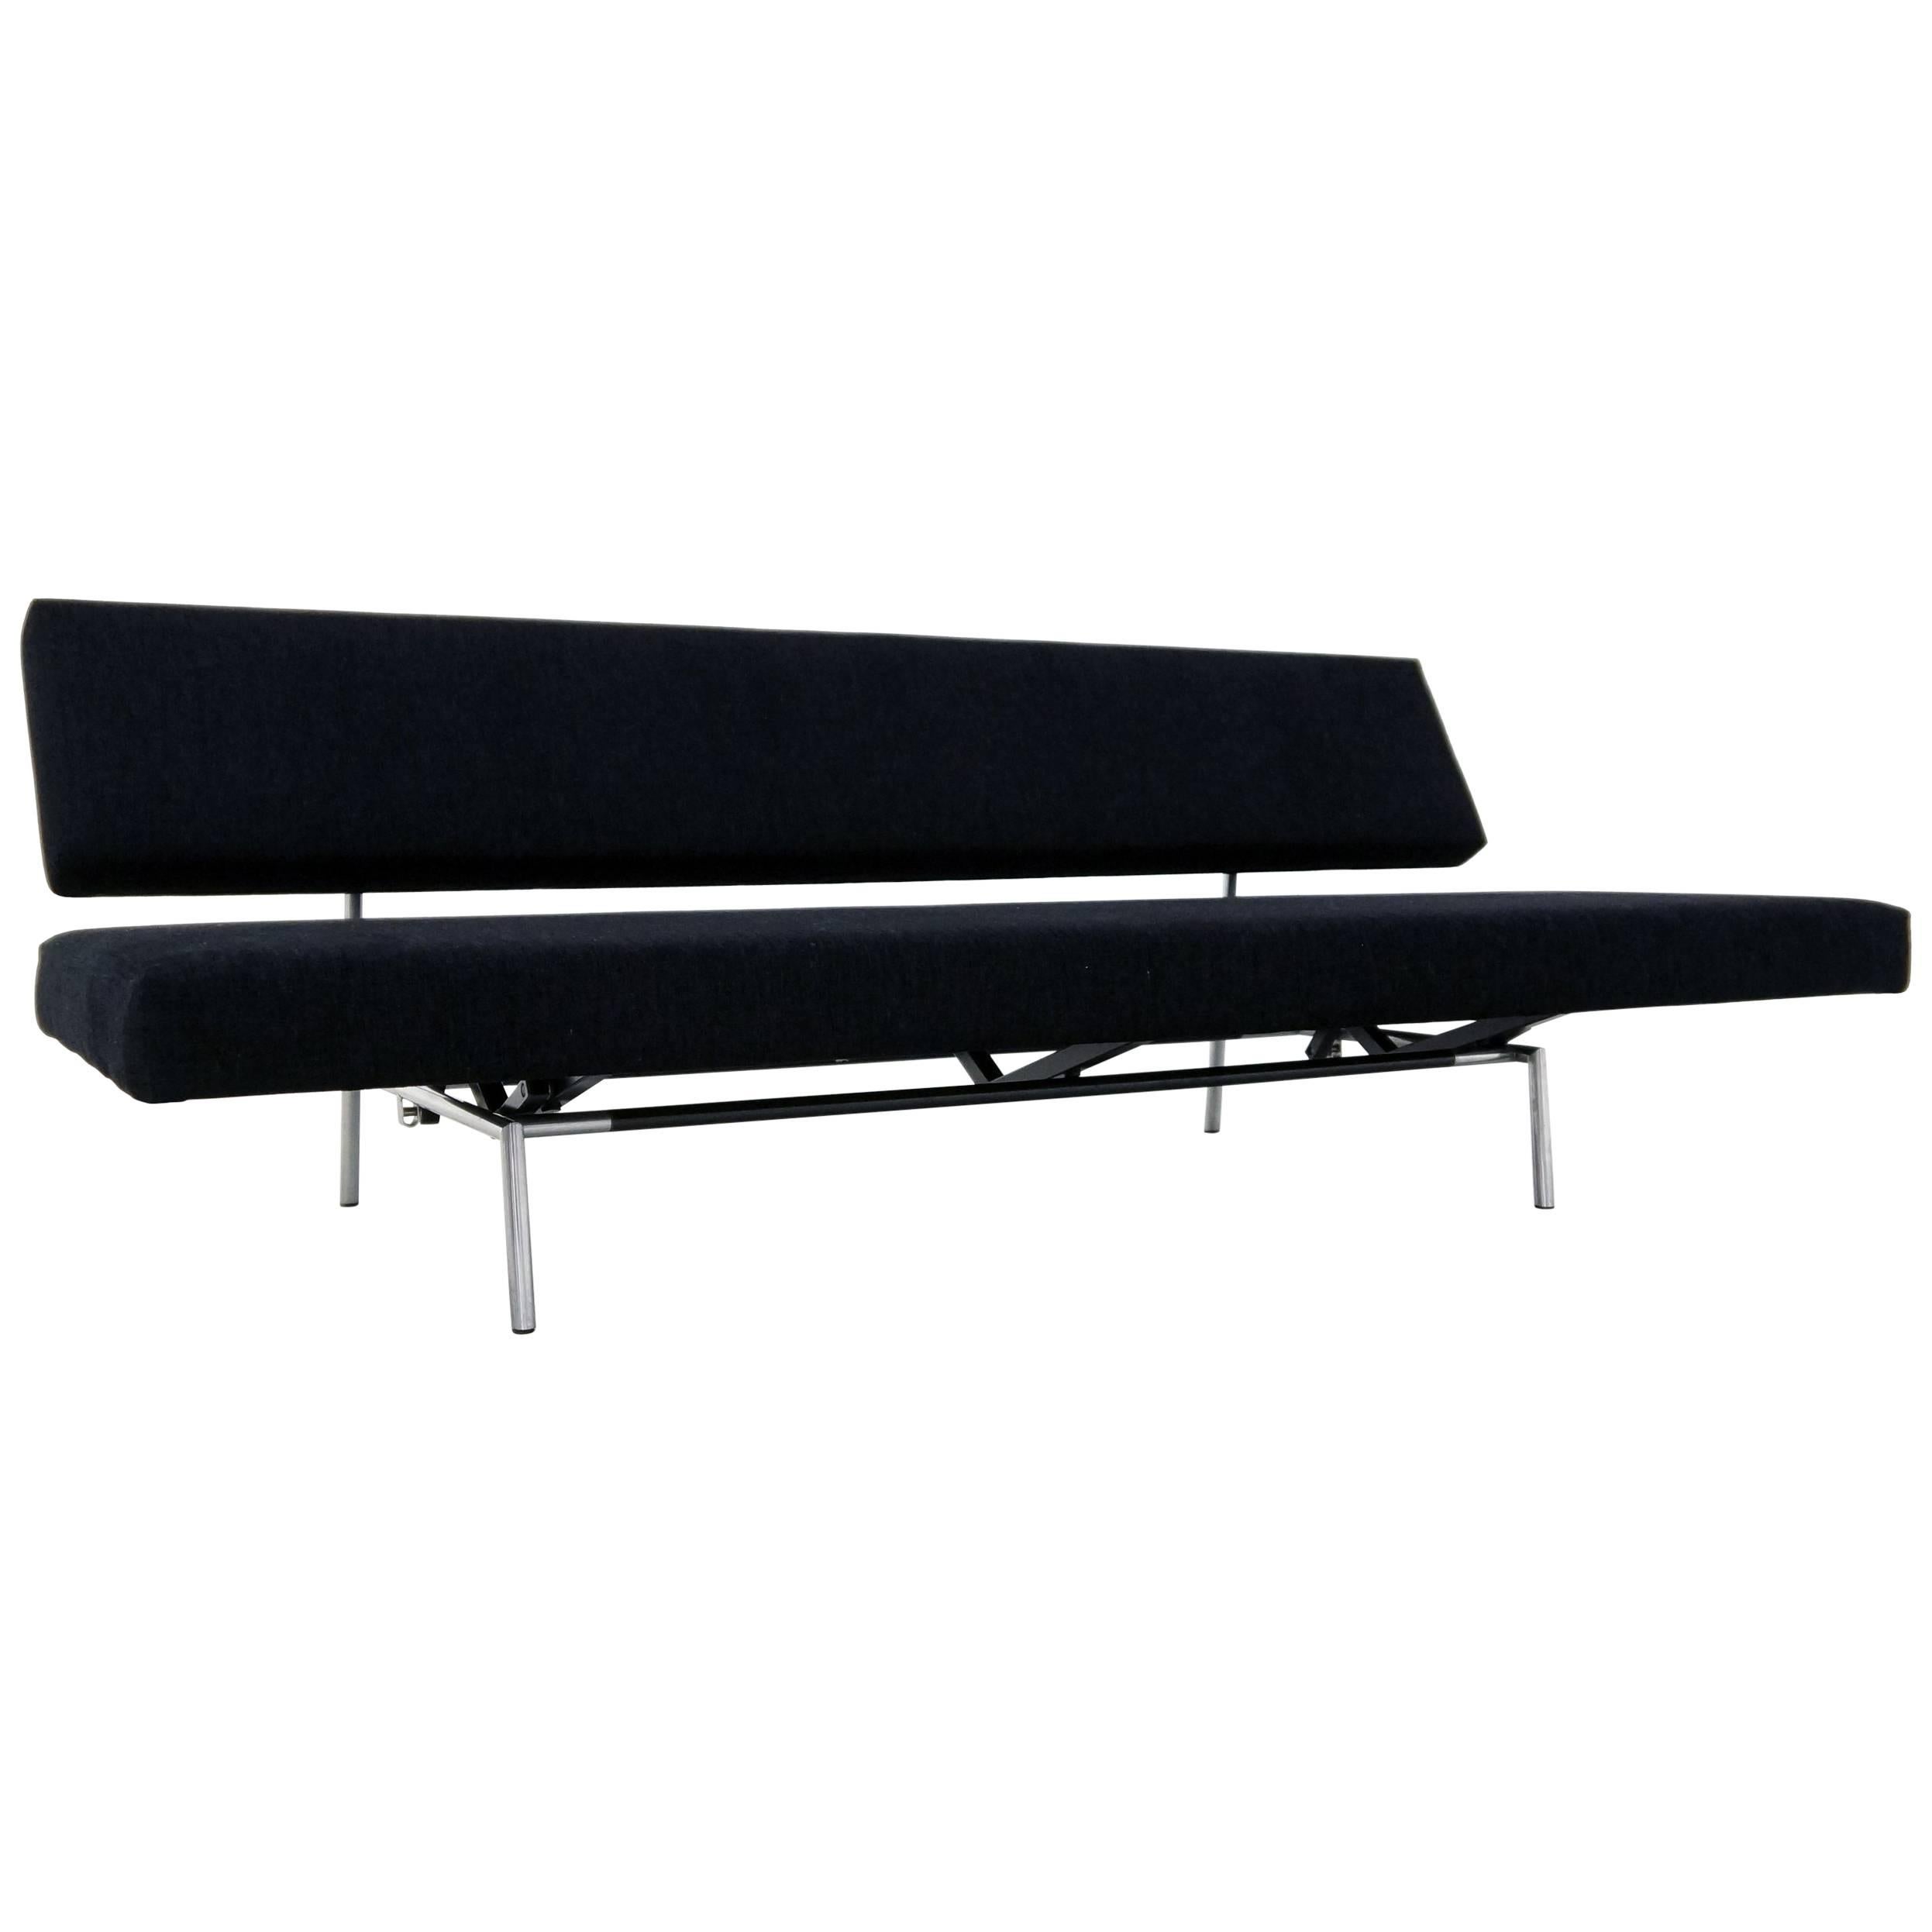 Black and Stainless Steel Daybed, Sofa by Martin Visser for Spectrum, 1958